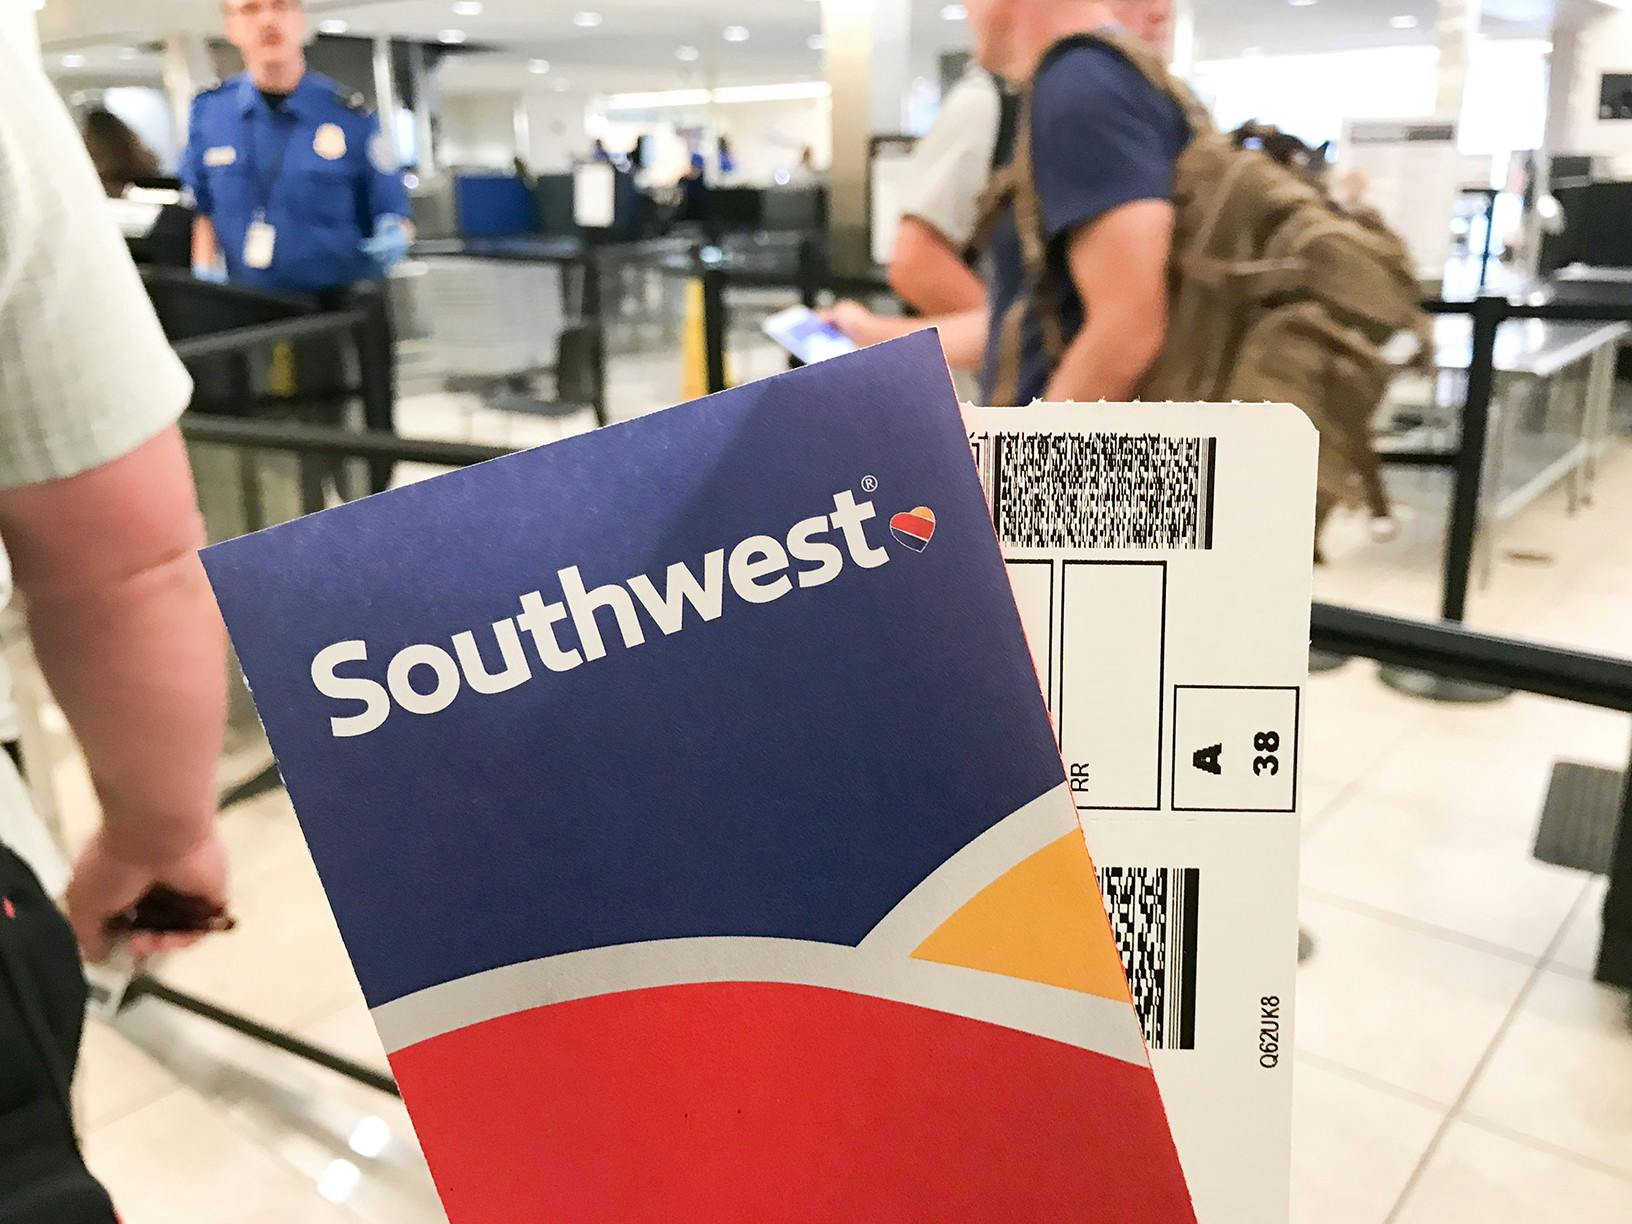 A Southwest airline ticket and envelope being held up while people are standing in line for TSA.